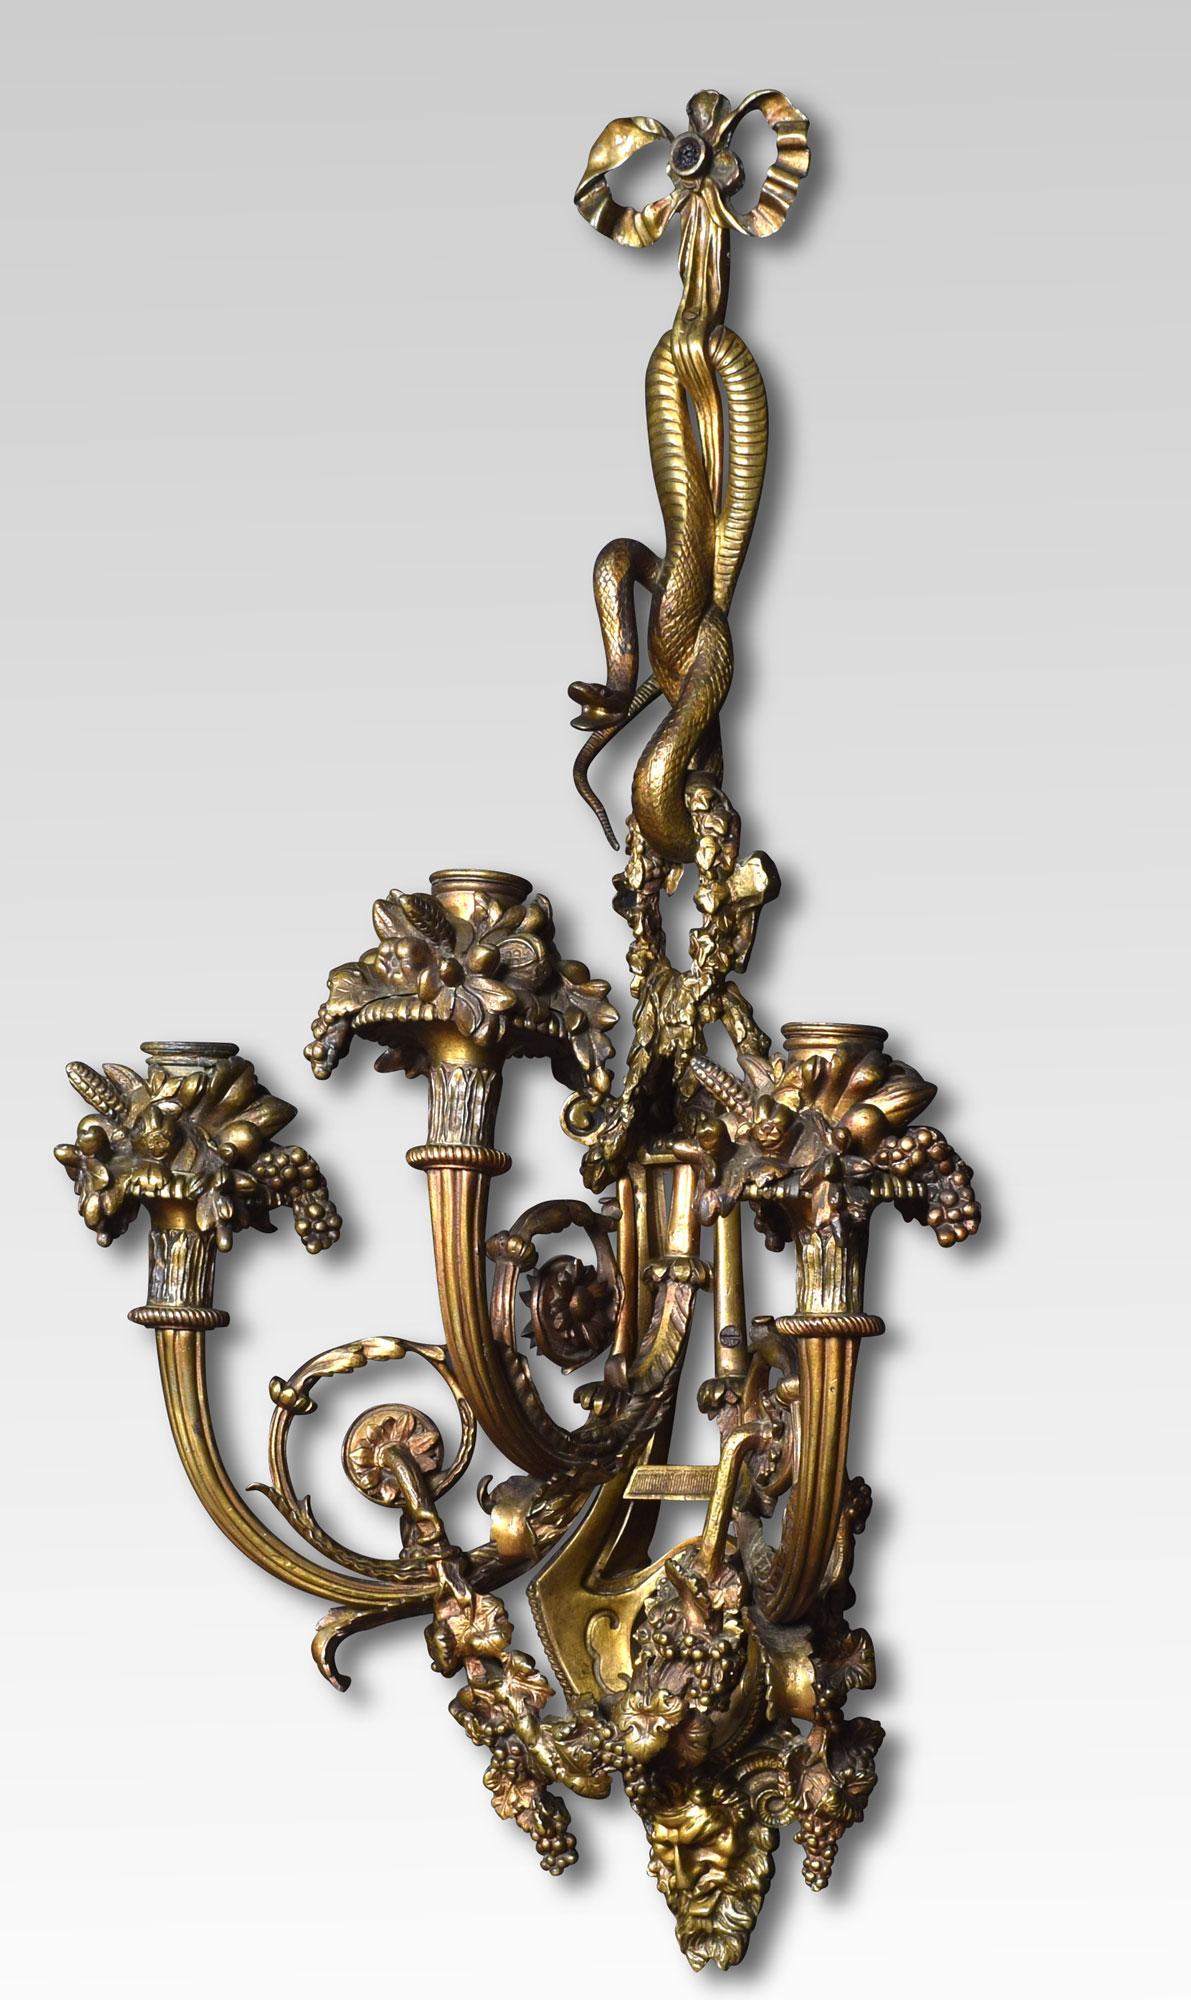 Pair of important impressive large scale mid-19th century French Louis XIV style gilt bronze three arm sconces. The richly designed pair with all original gilt having unusual serpent decoration above three scrolling arms with floral relief